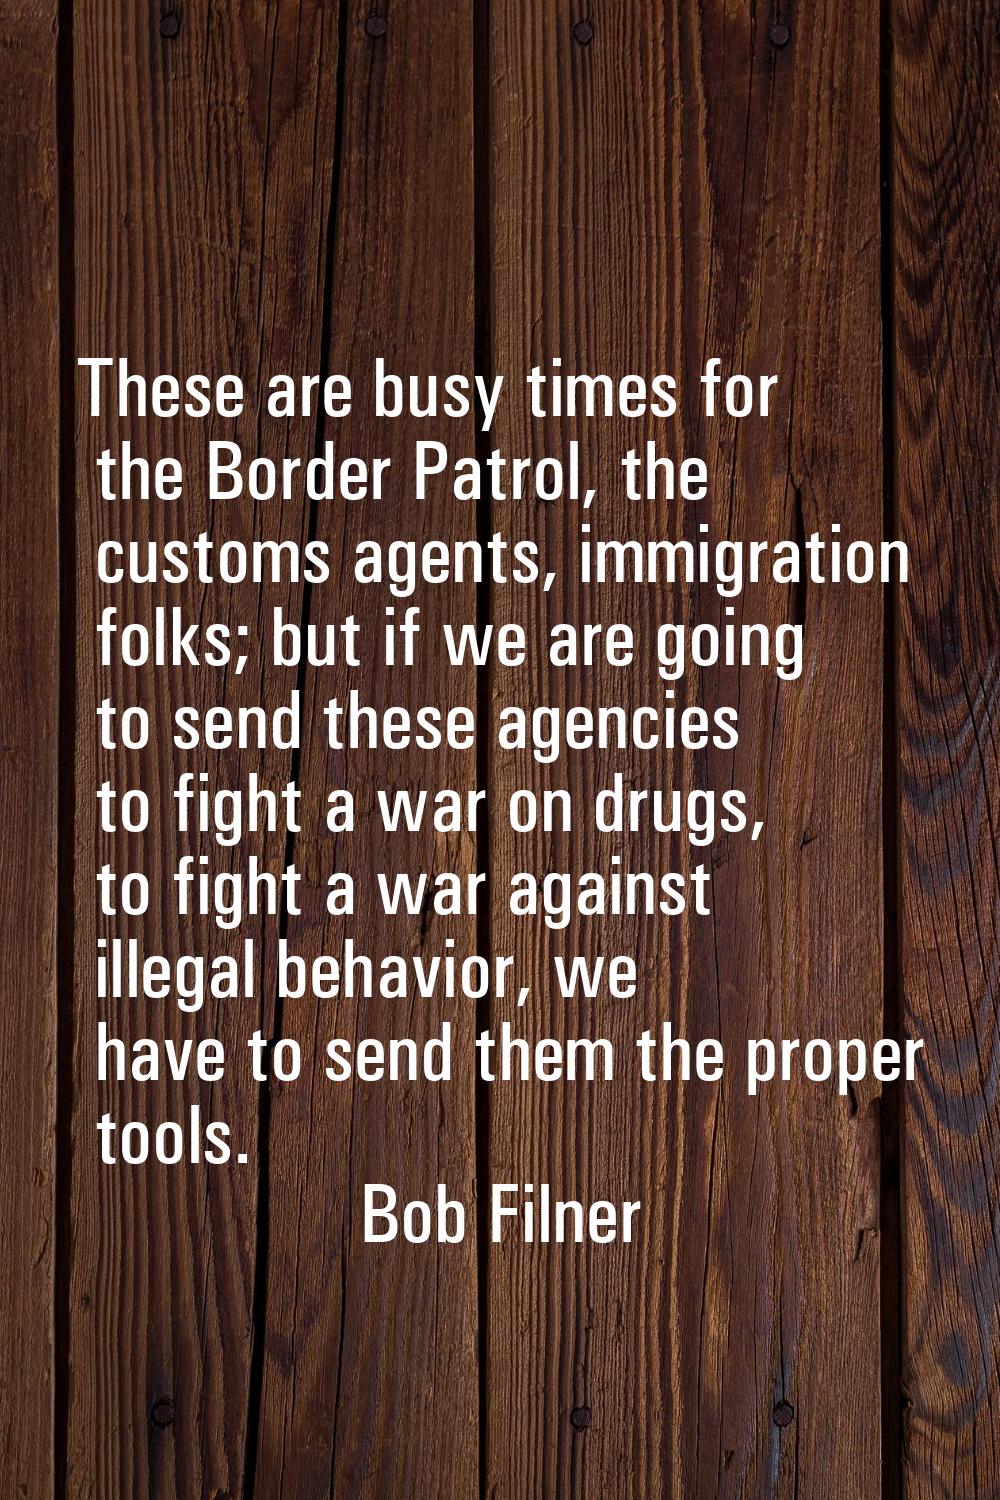 These are busy times for the Border Patrol, the customs agents, immigration folks; but if we are go